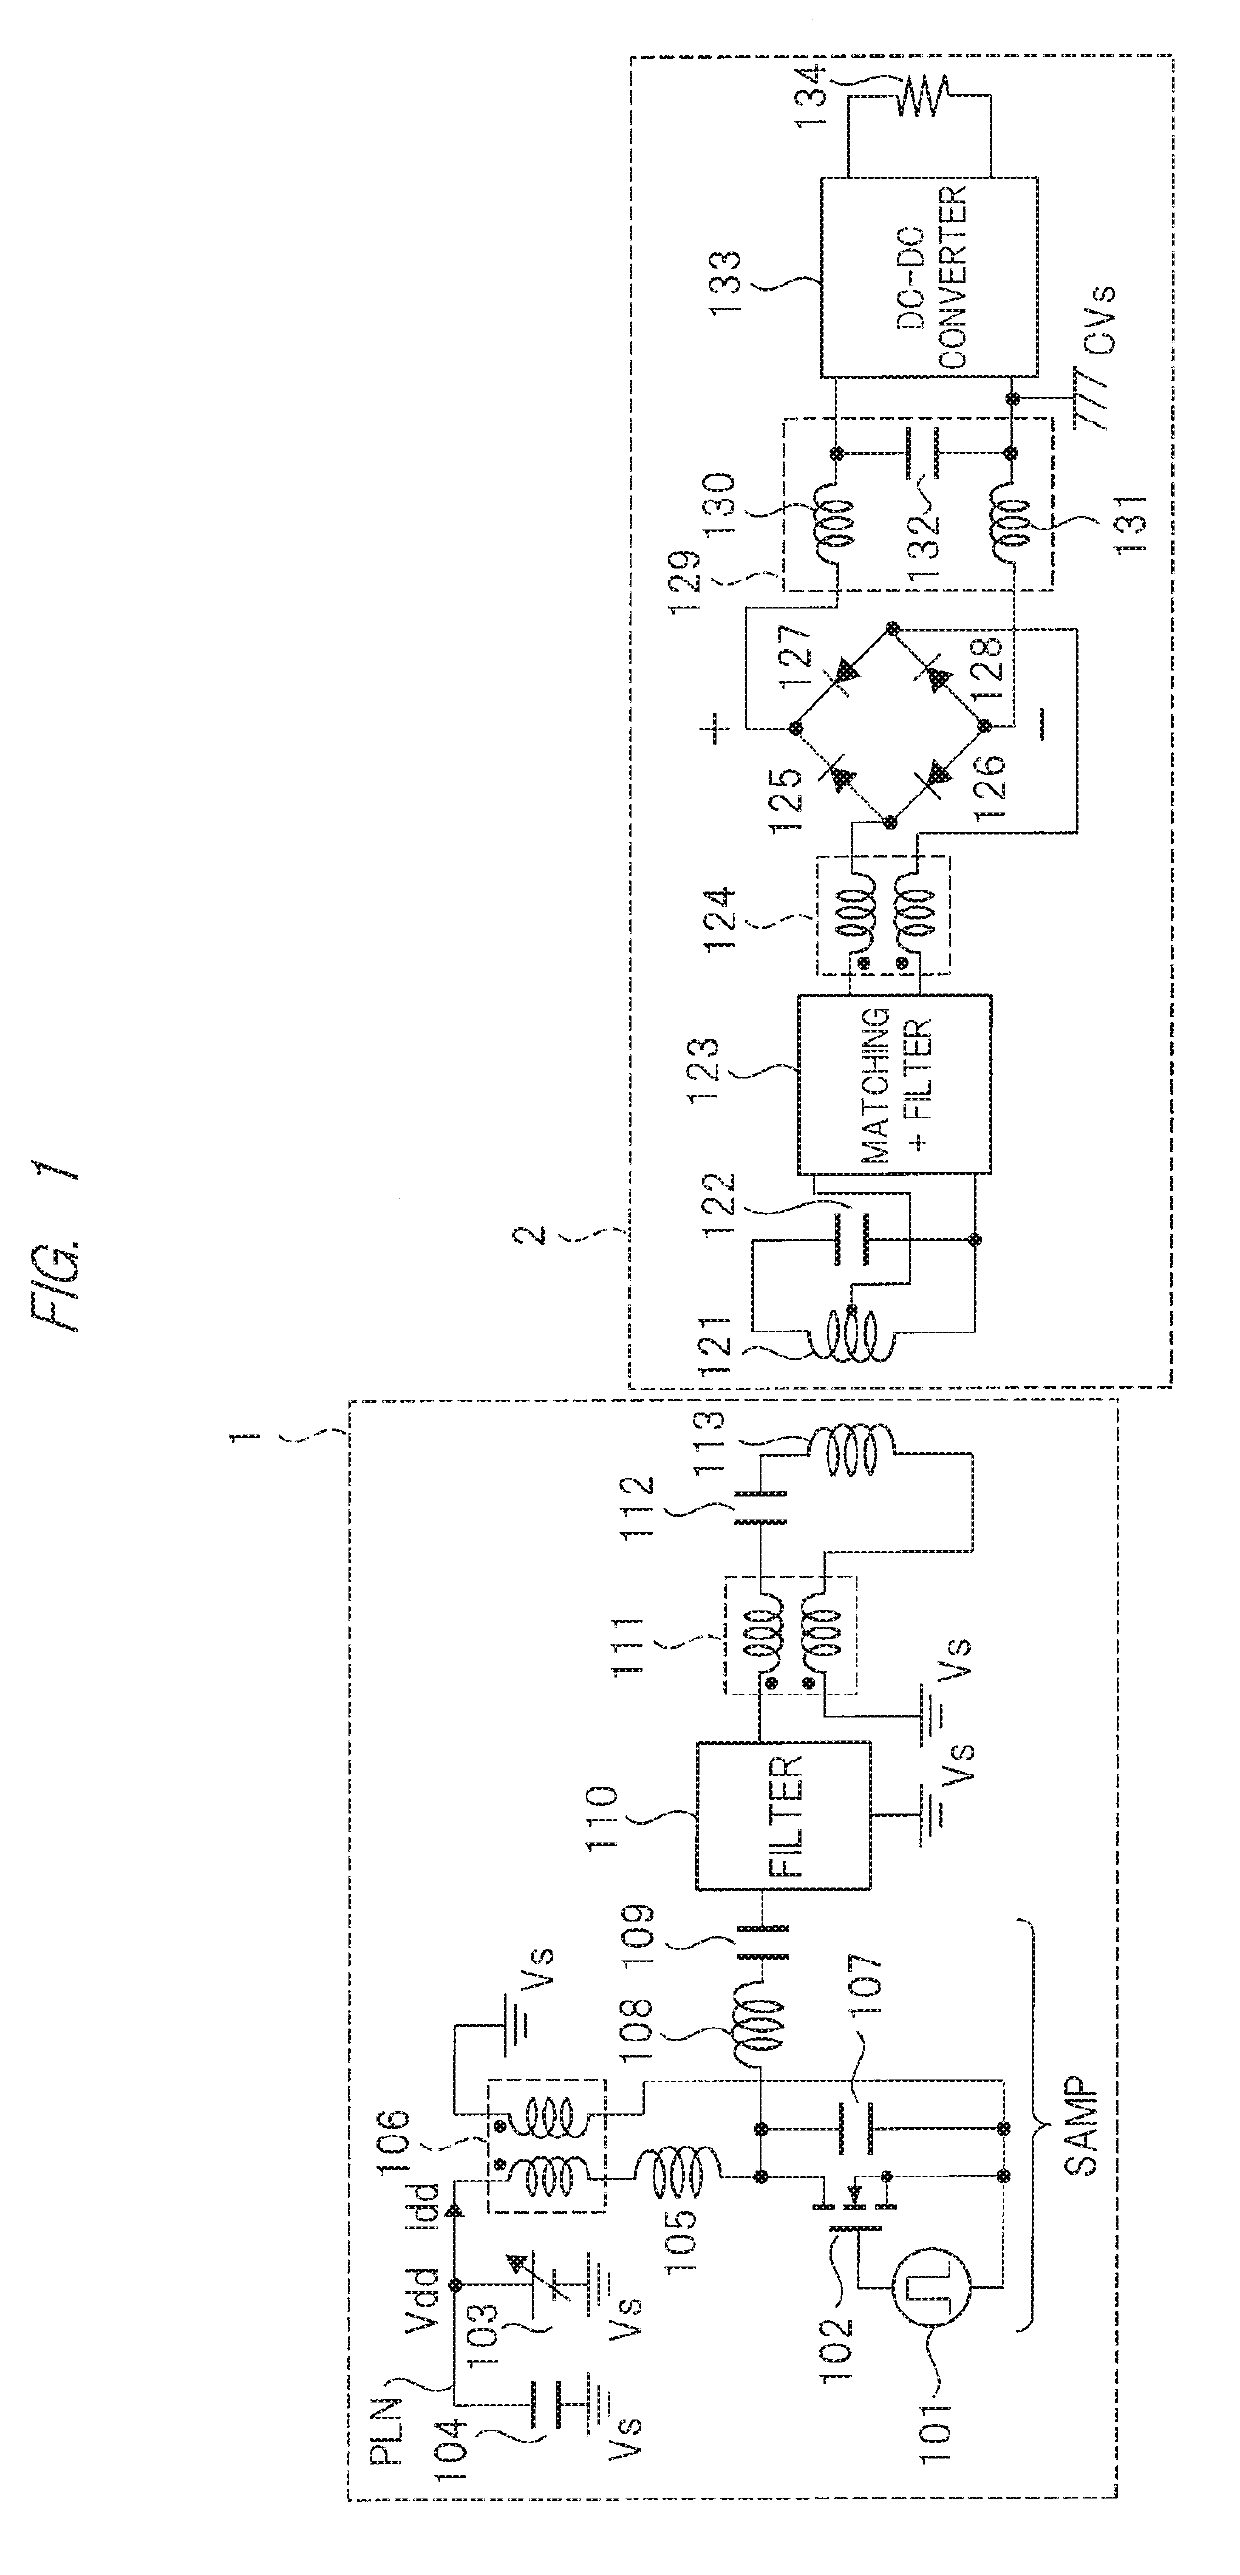 Contactless power receiving device, contactless power transfer device, and contactless power transfer and receiving device